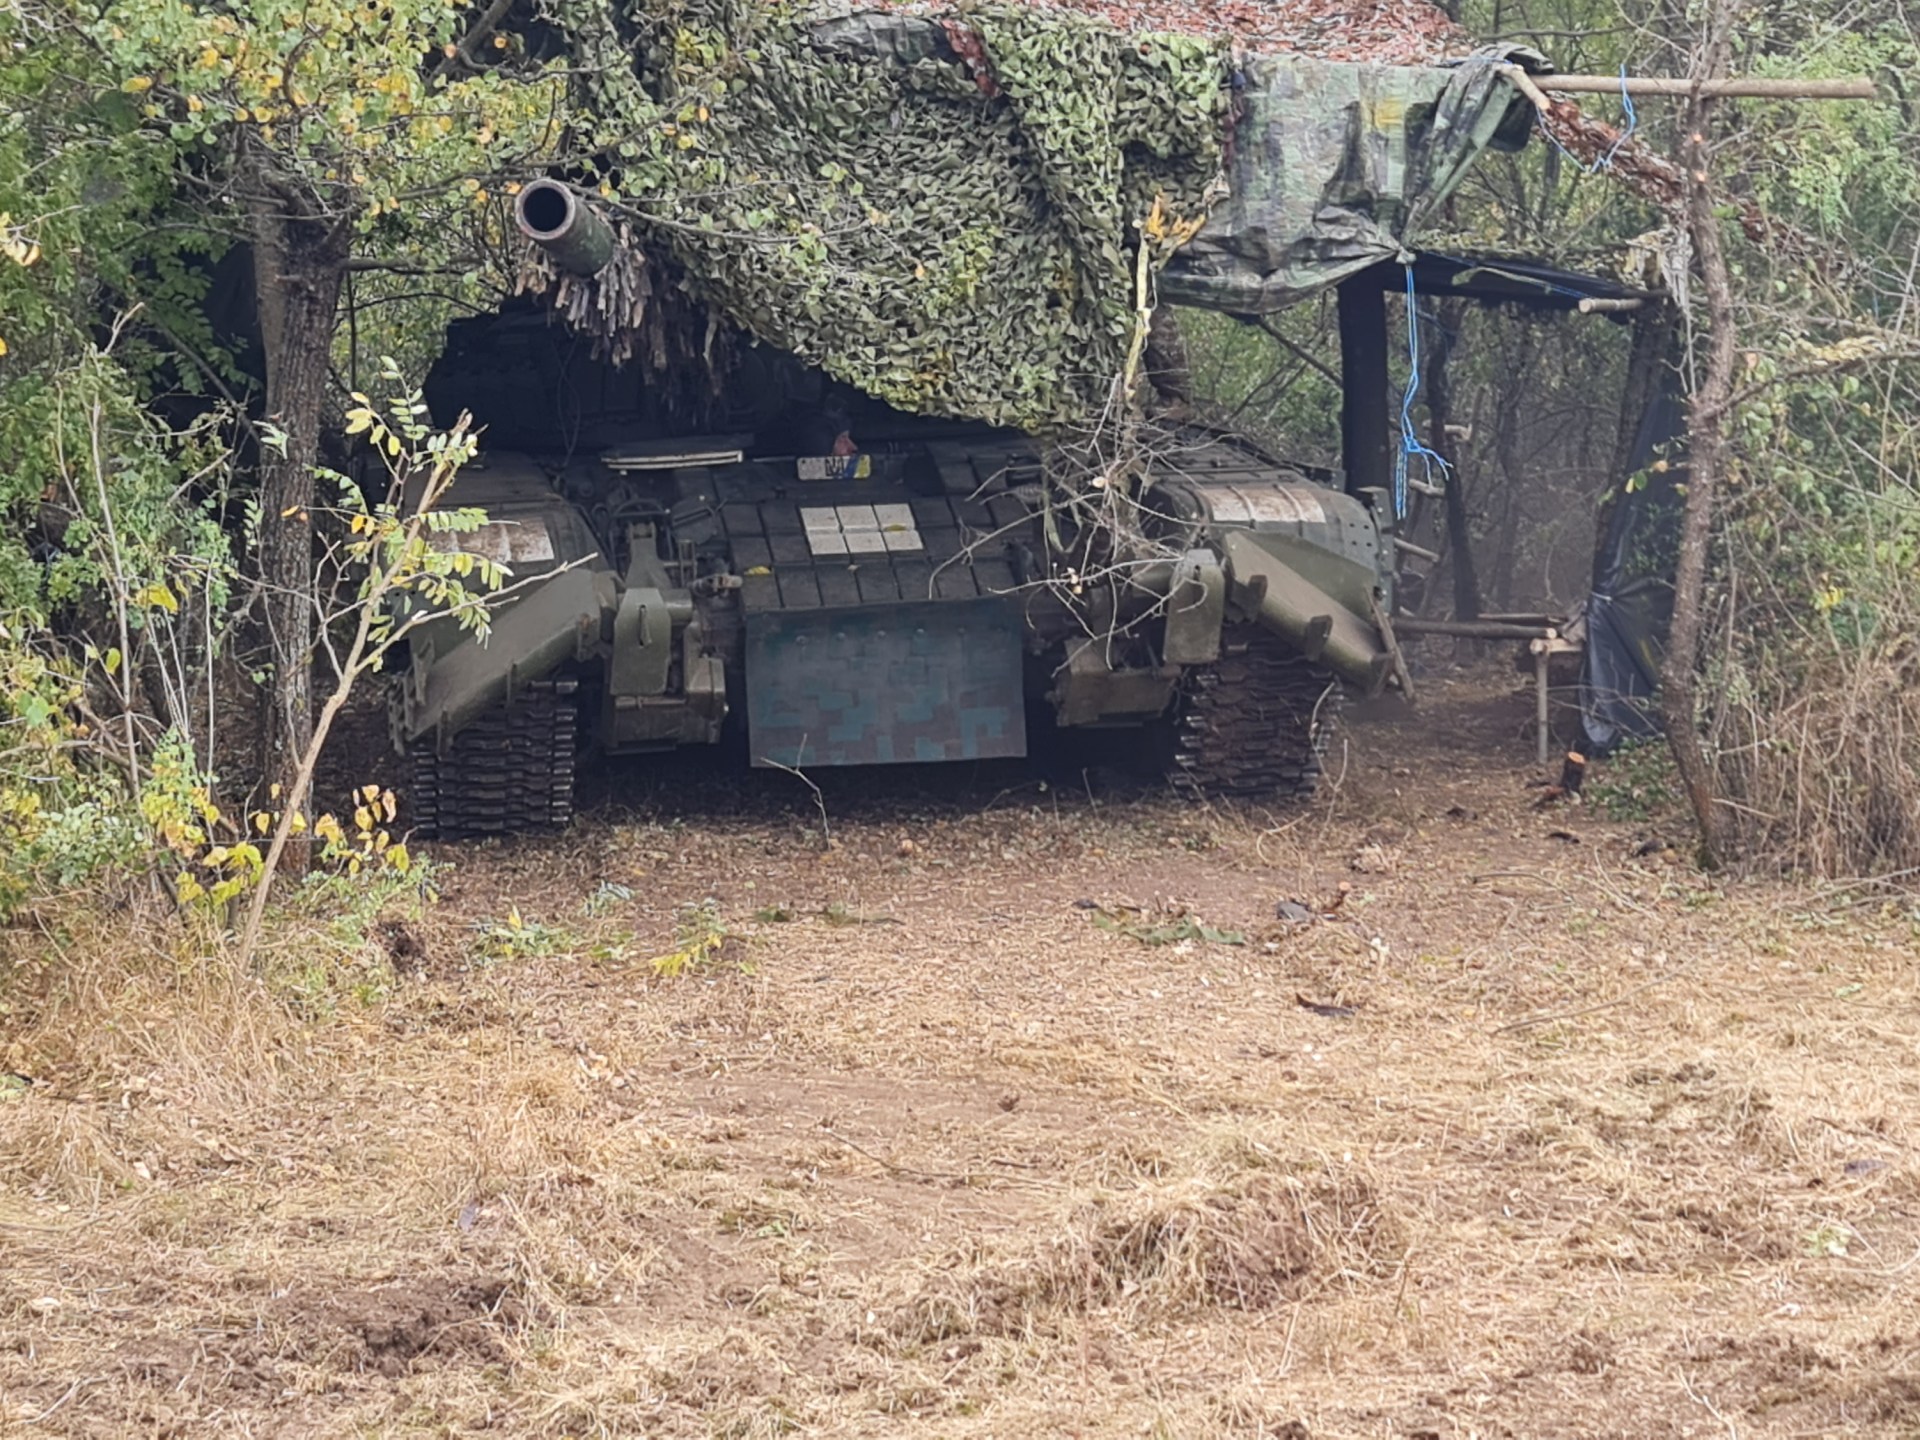 Dispatches from Ukraine’s front lines: A brigade on the southern front